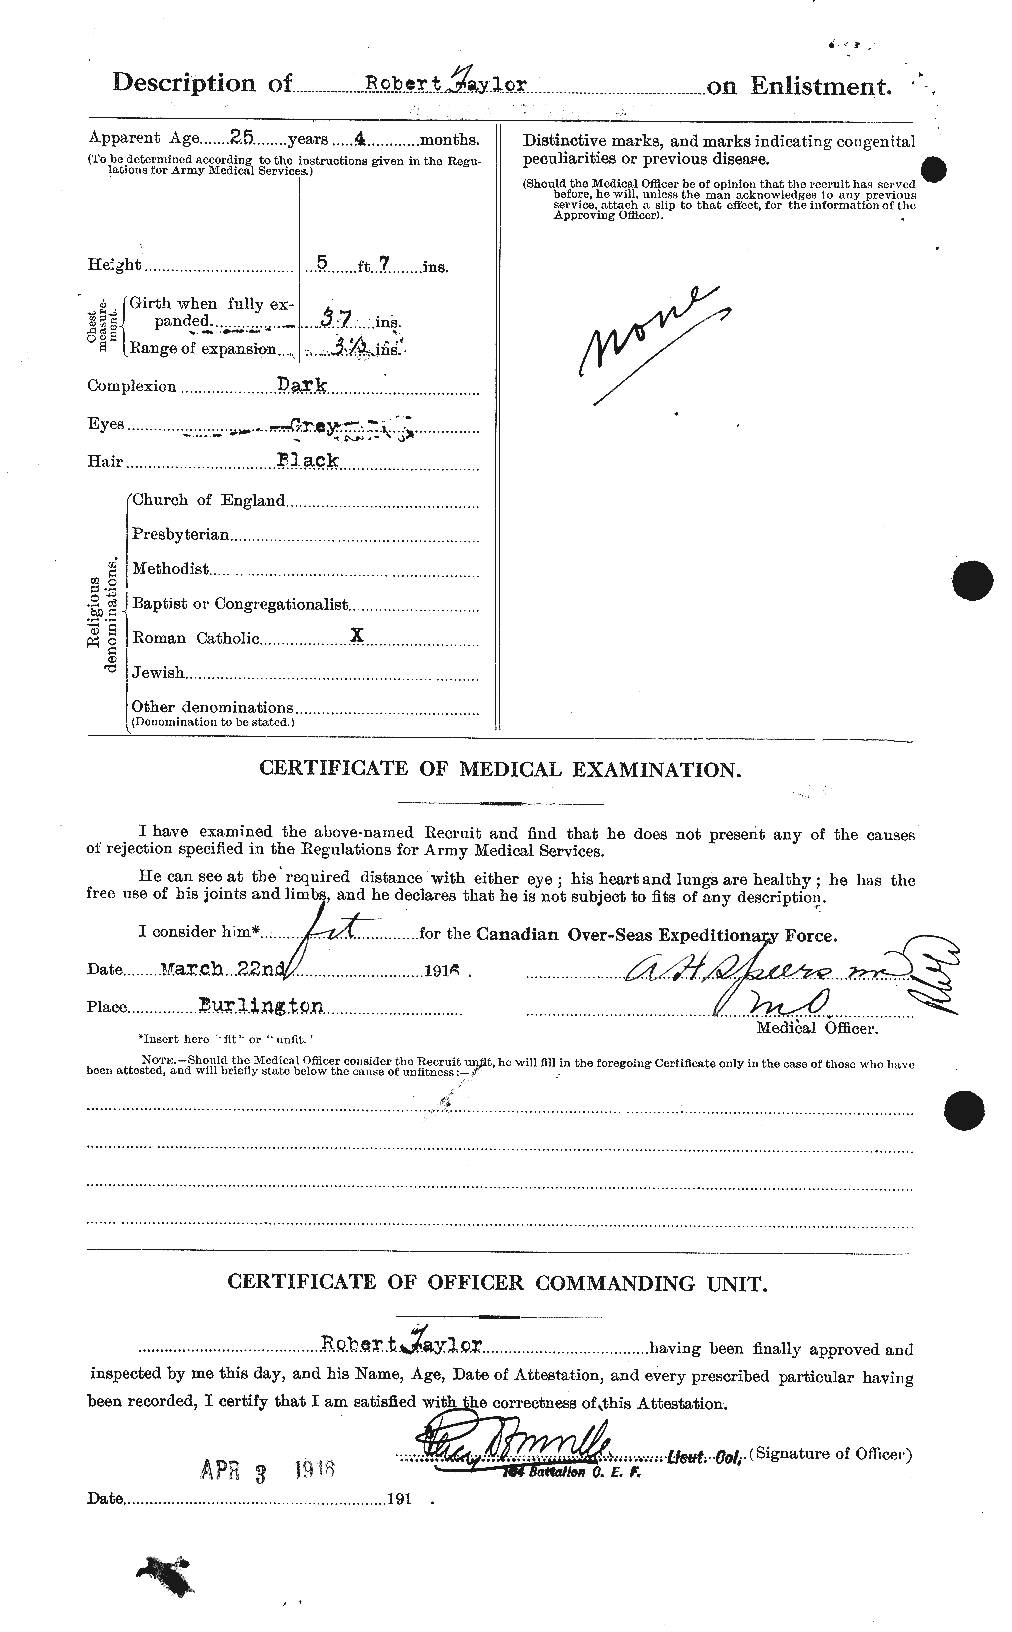 Personnel Records of the First World War - CEF 627477b